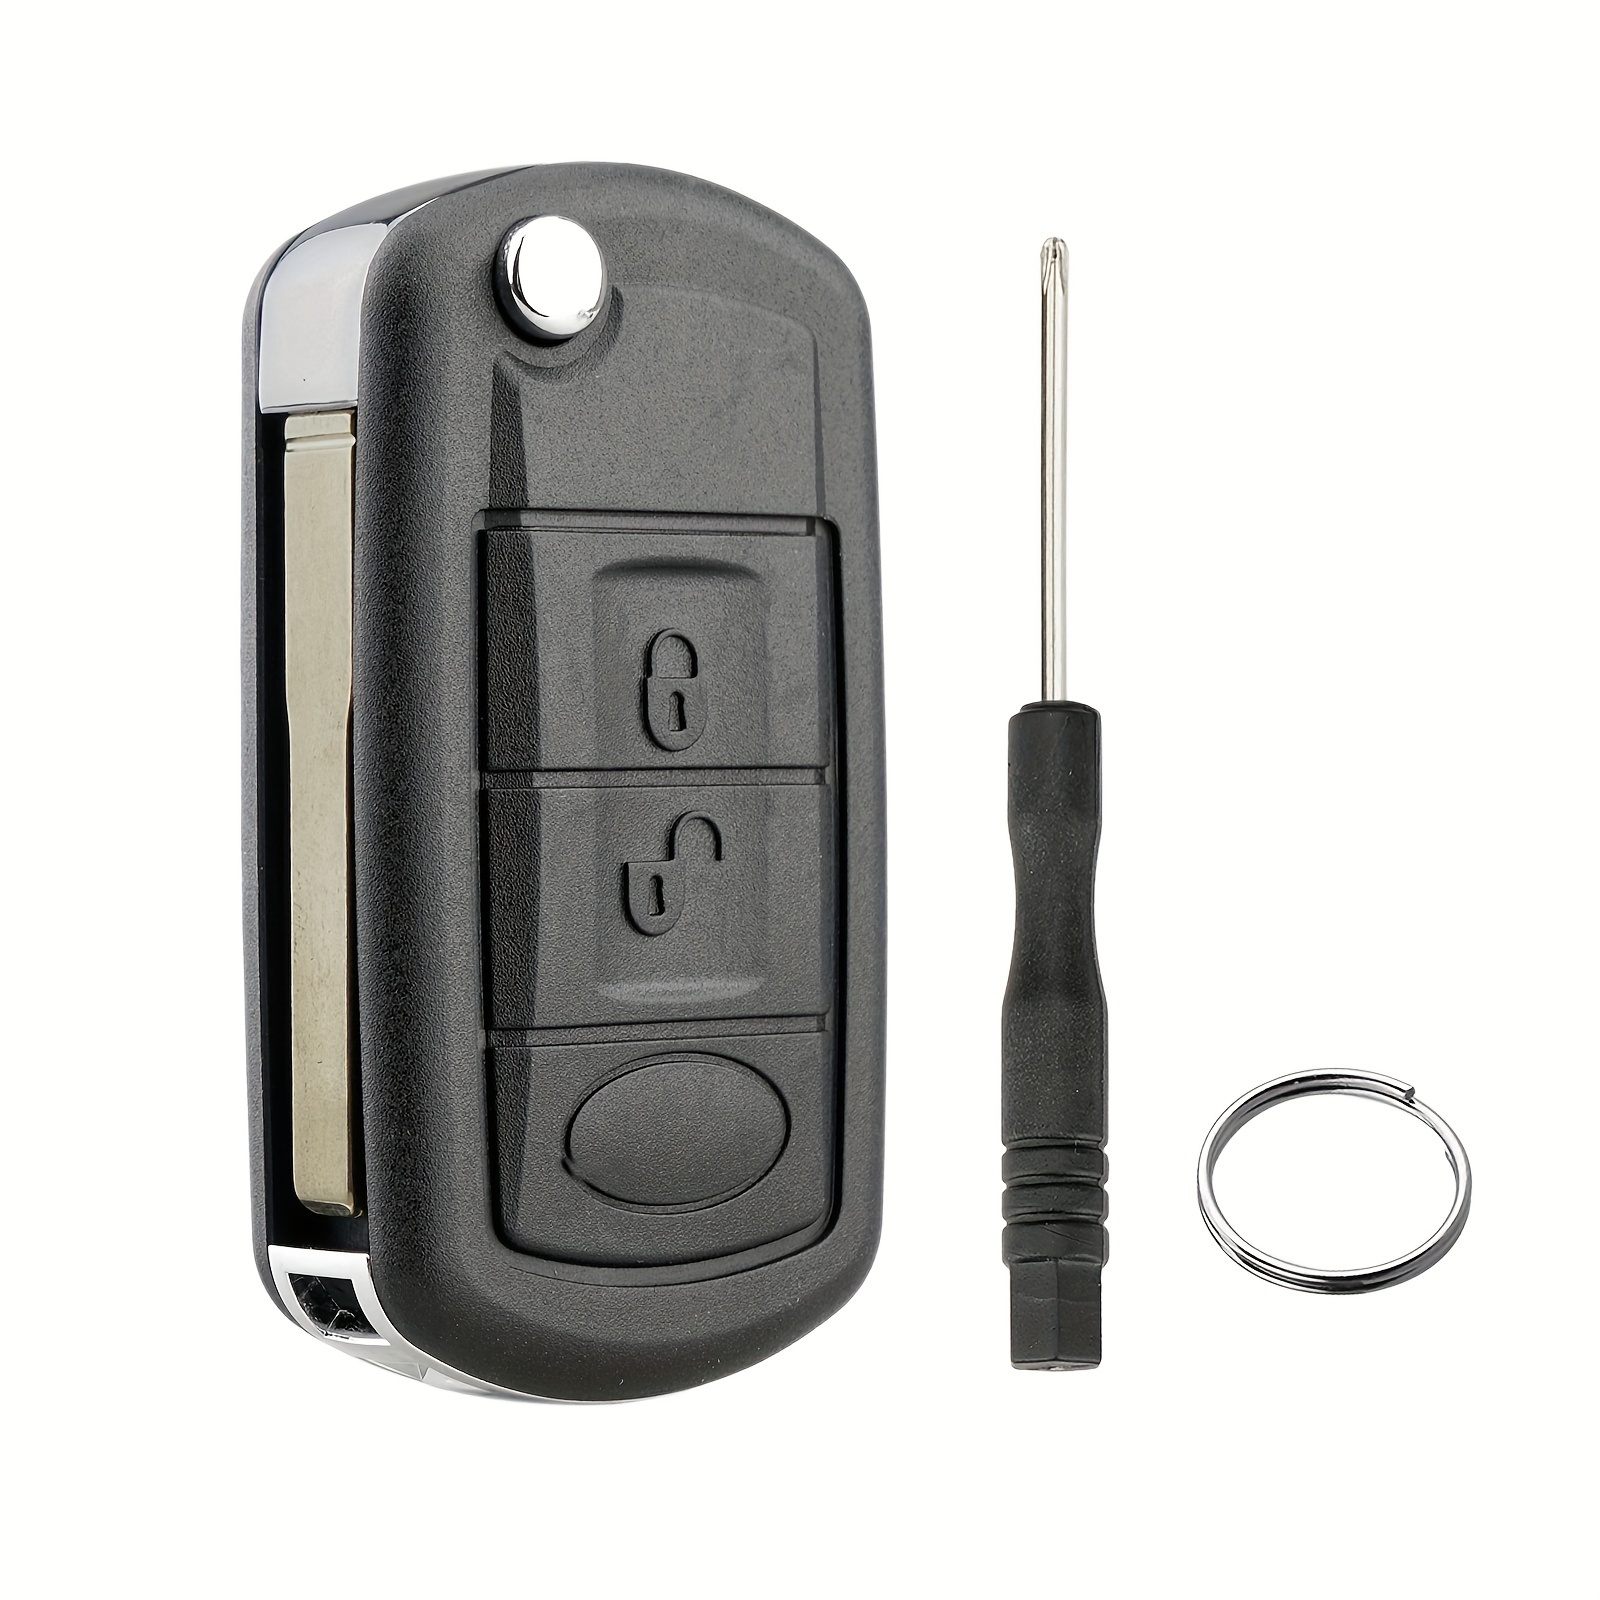 Remote Key Fob for Land Rover L322 Vogue 3 button